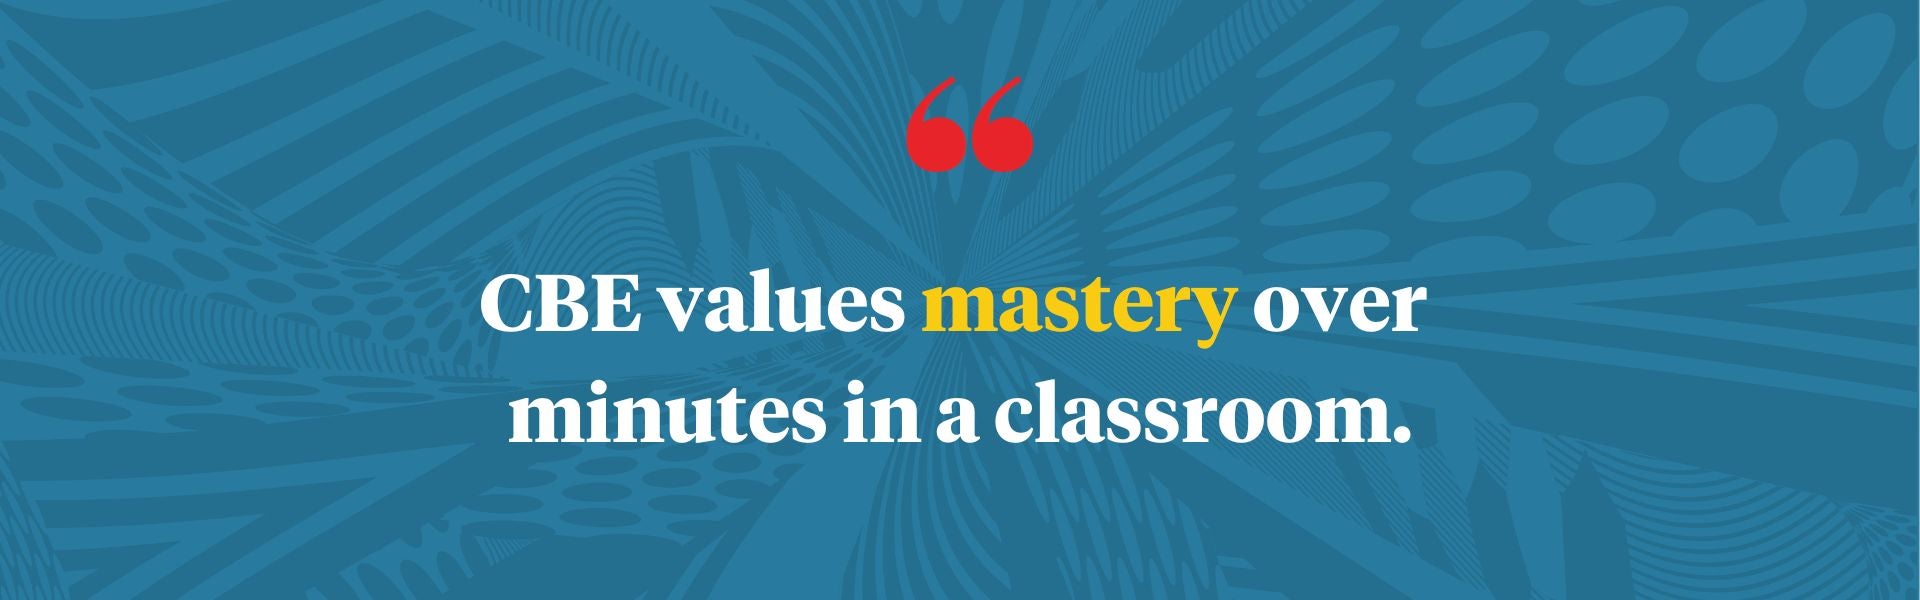 cbe values mastery over minutes in a classroom